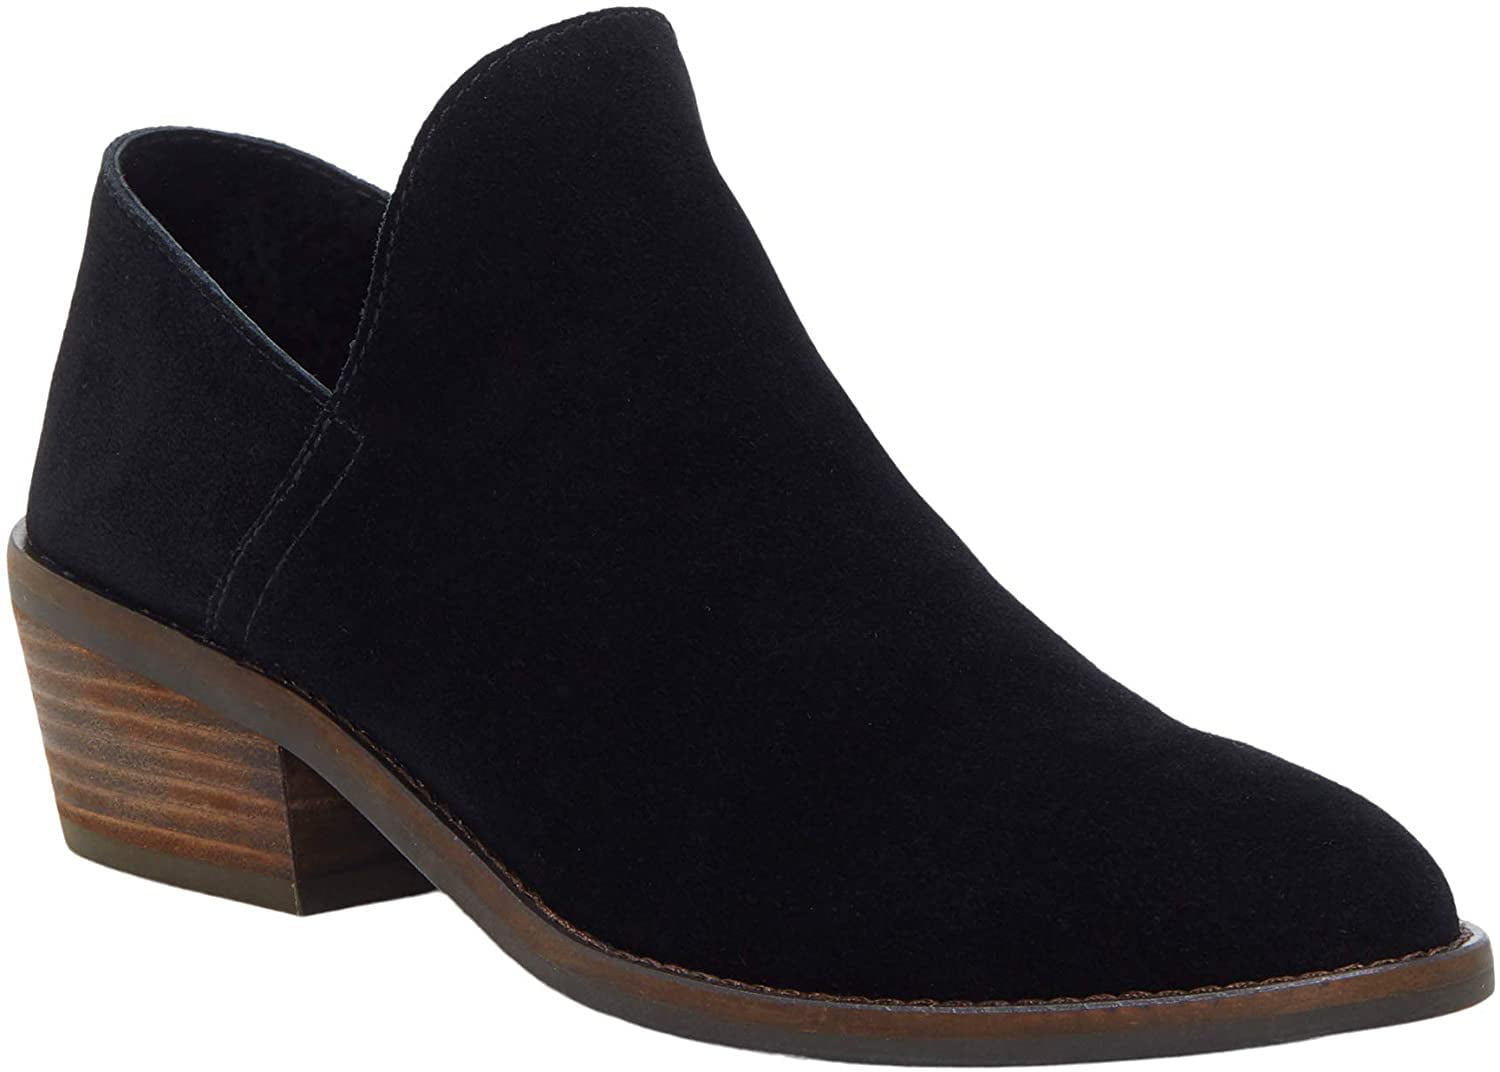 Lucky Brand Women's Fausst Ankle Boot, Black Suede, 7 M US | Walmart Canada